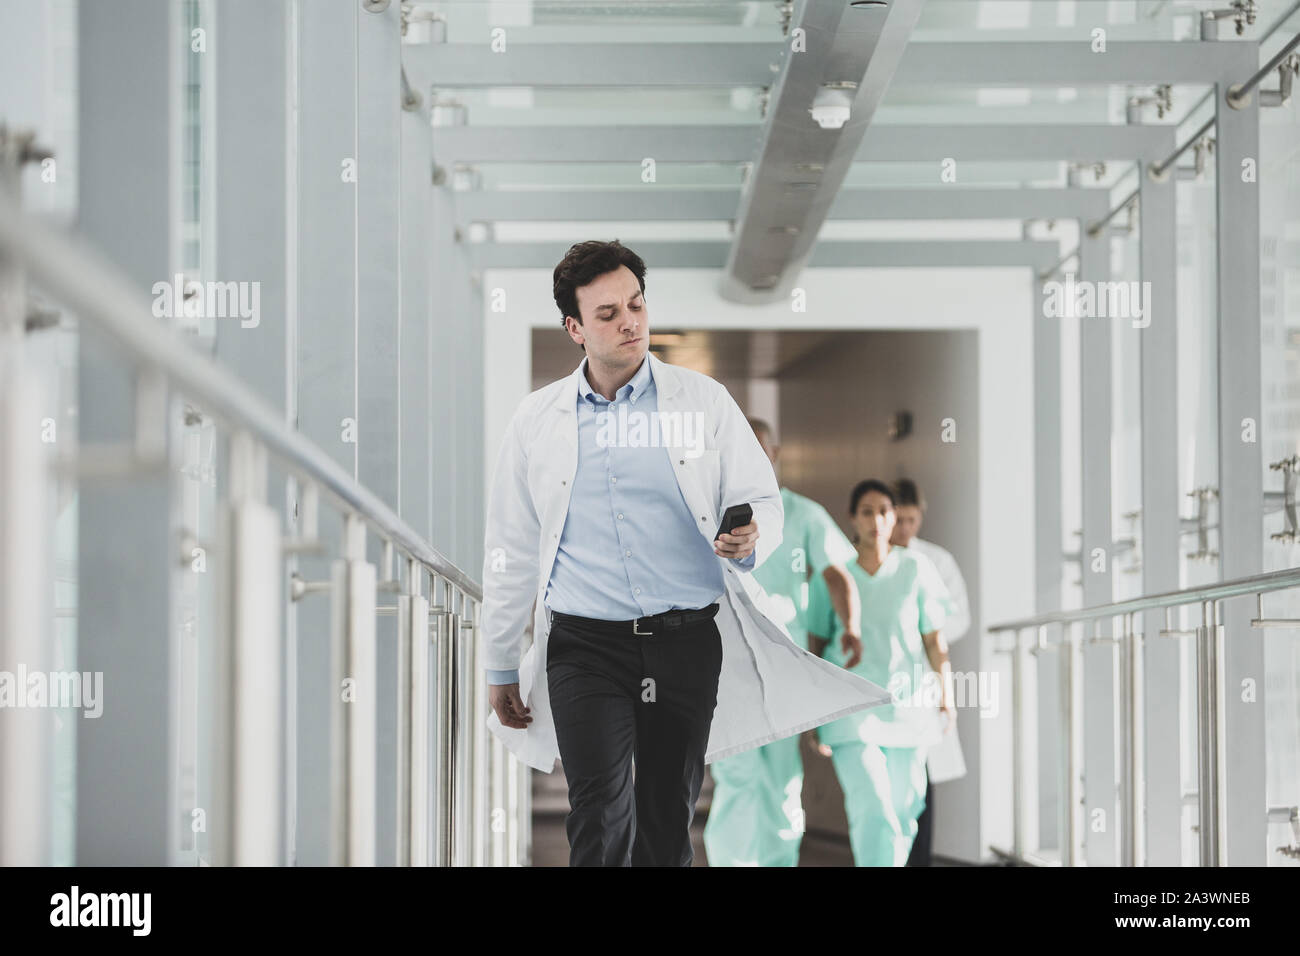 Portrait of Male Doctor walking through Hospital Stock Photo